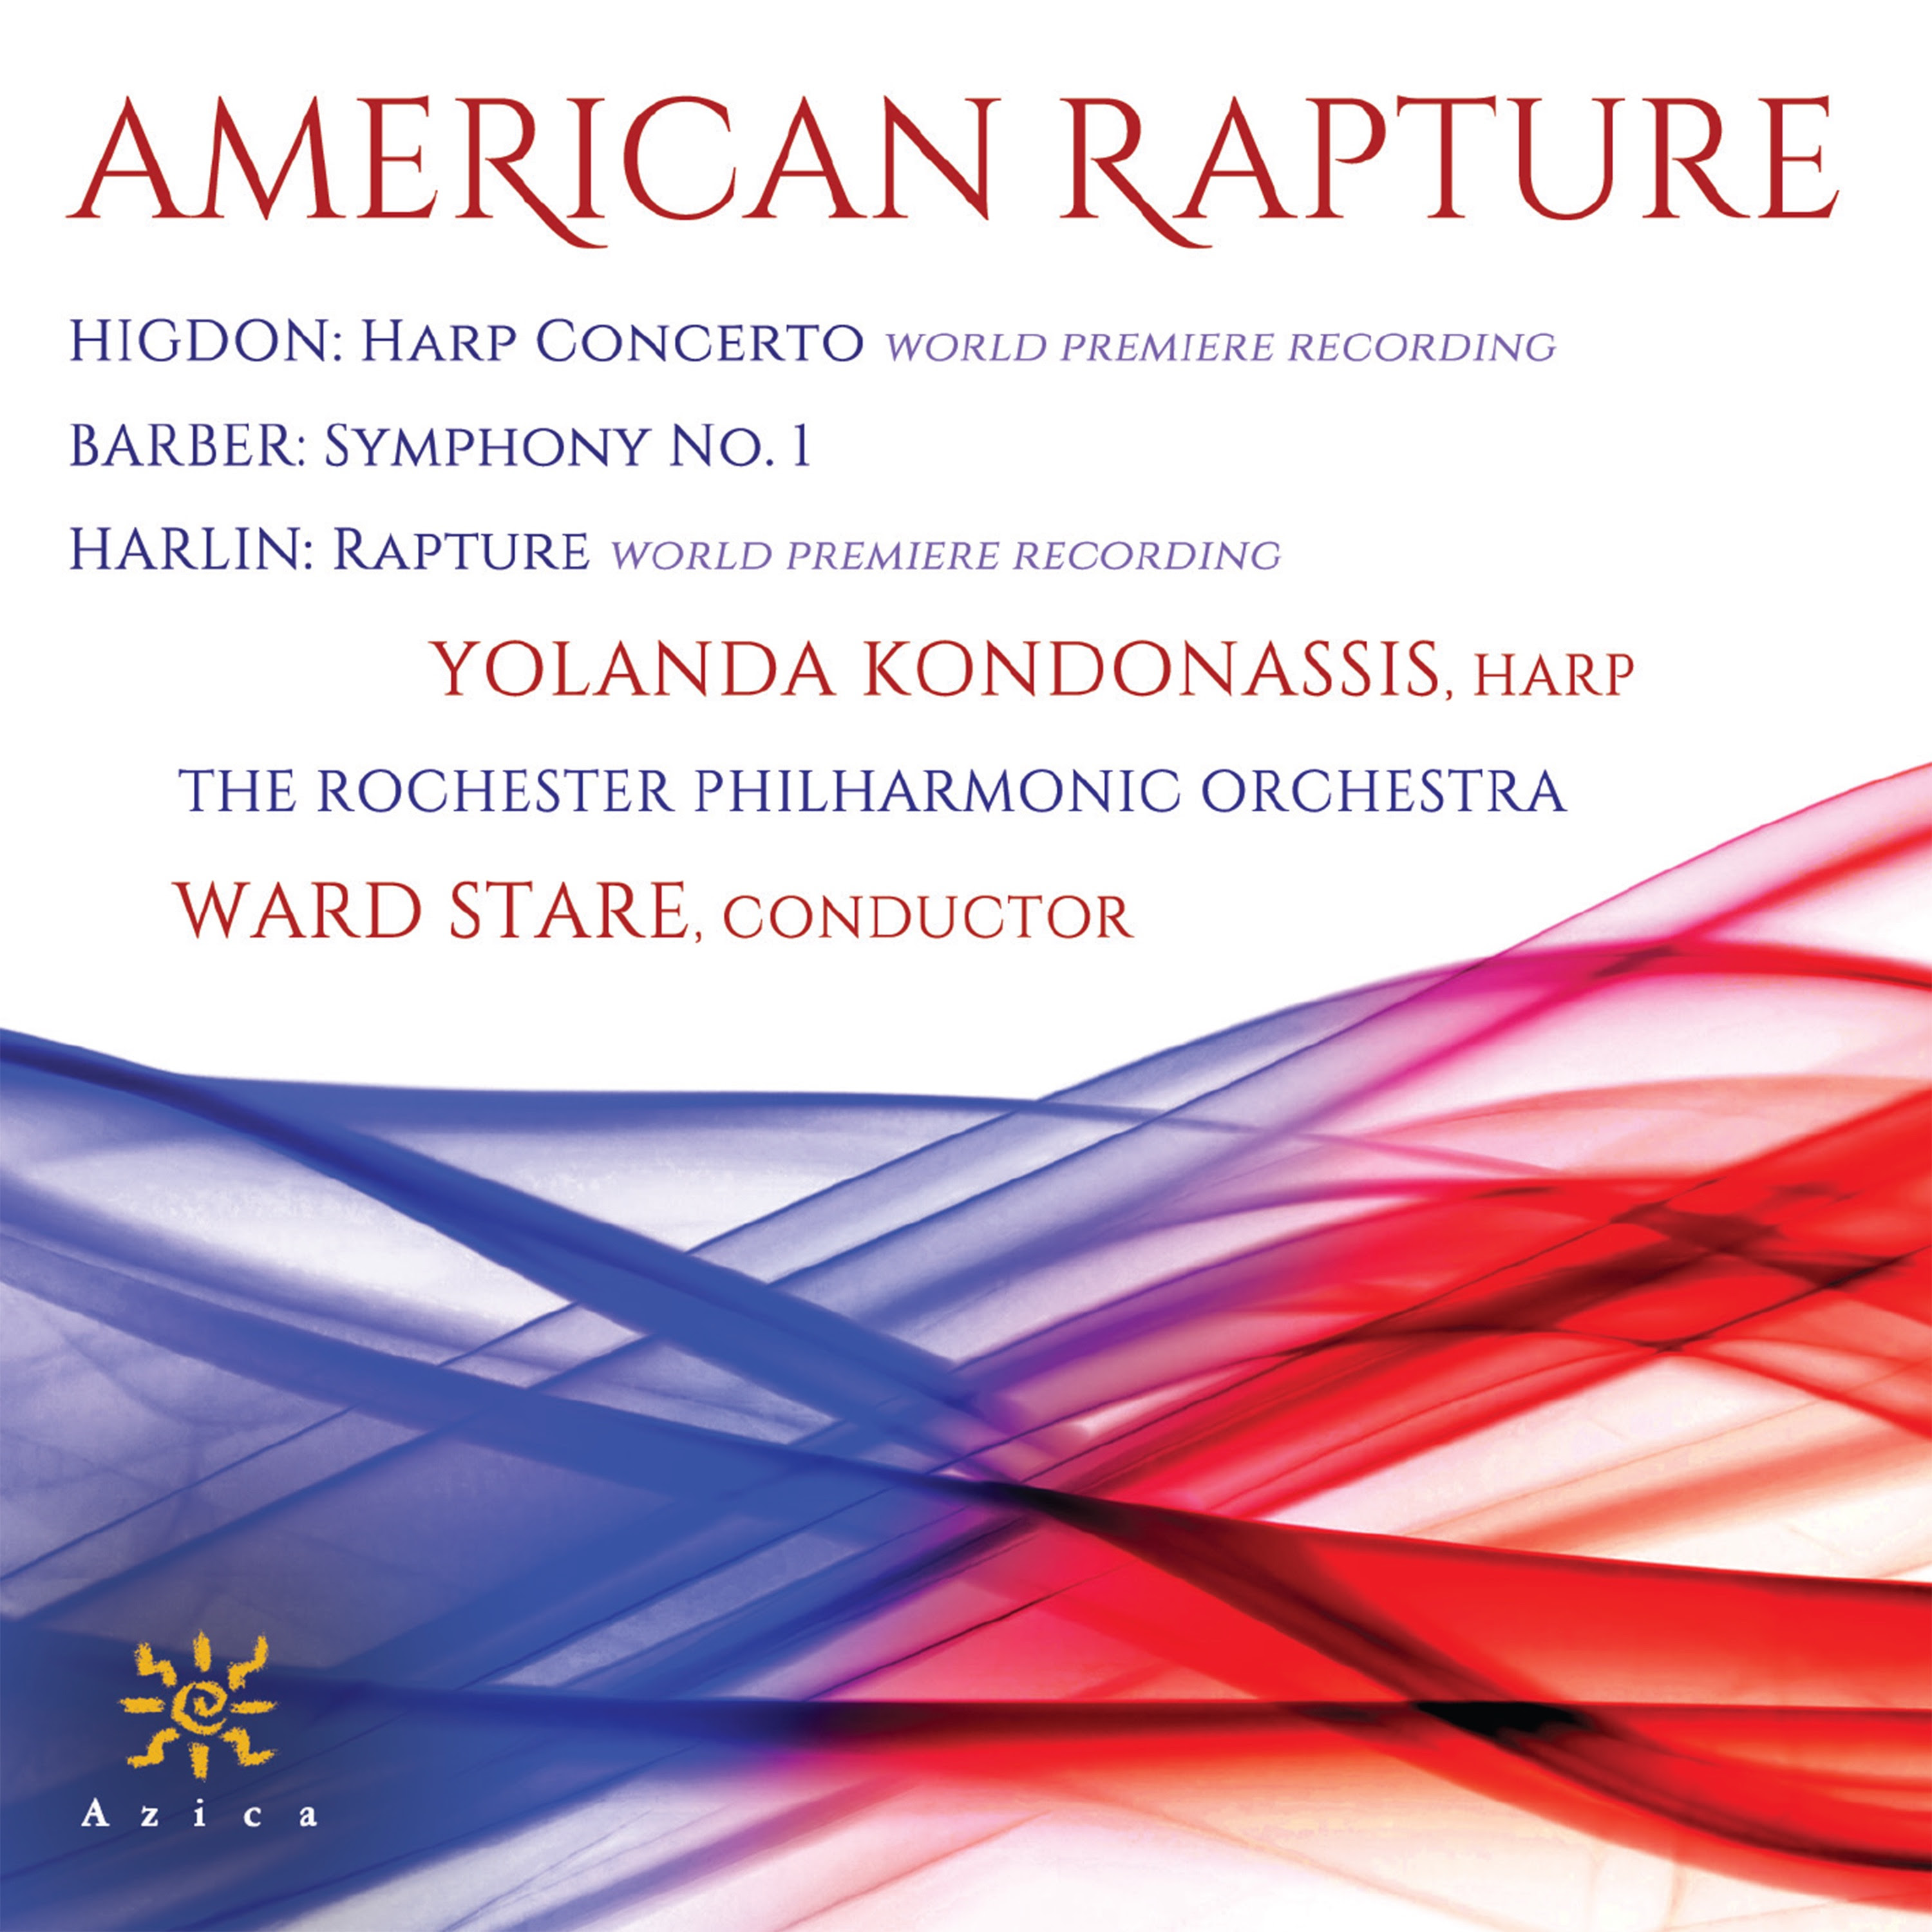 AmericanRapture_Frontcover_Physical_and_Digital copy.jpg